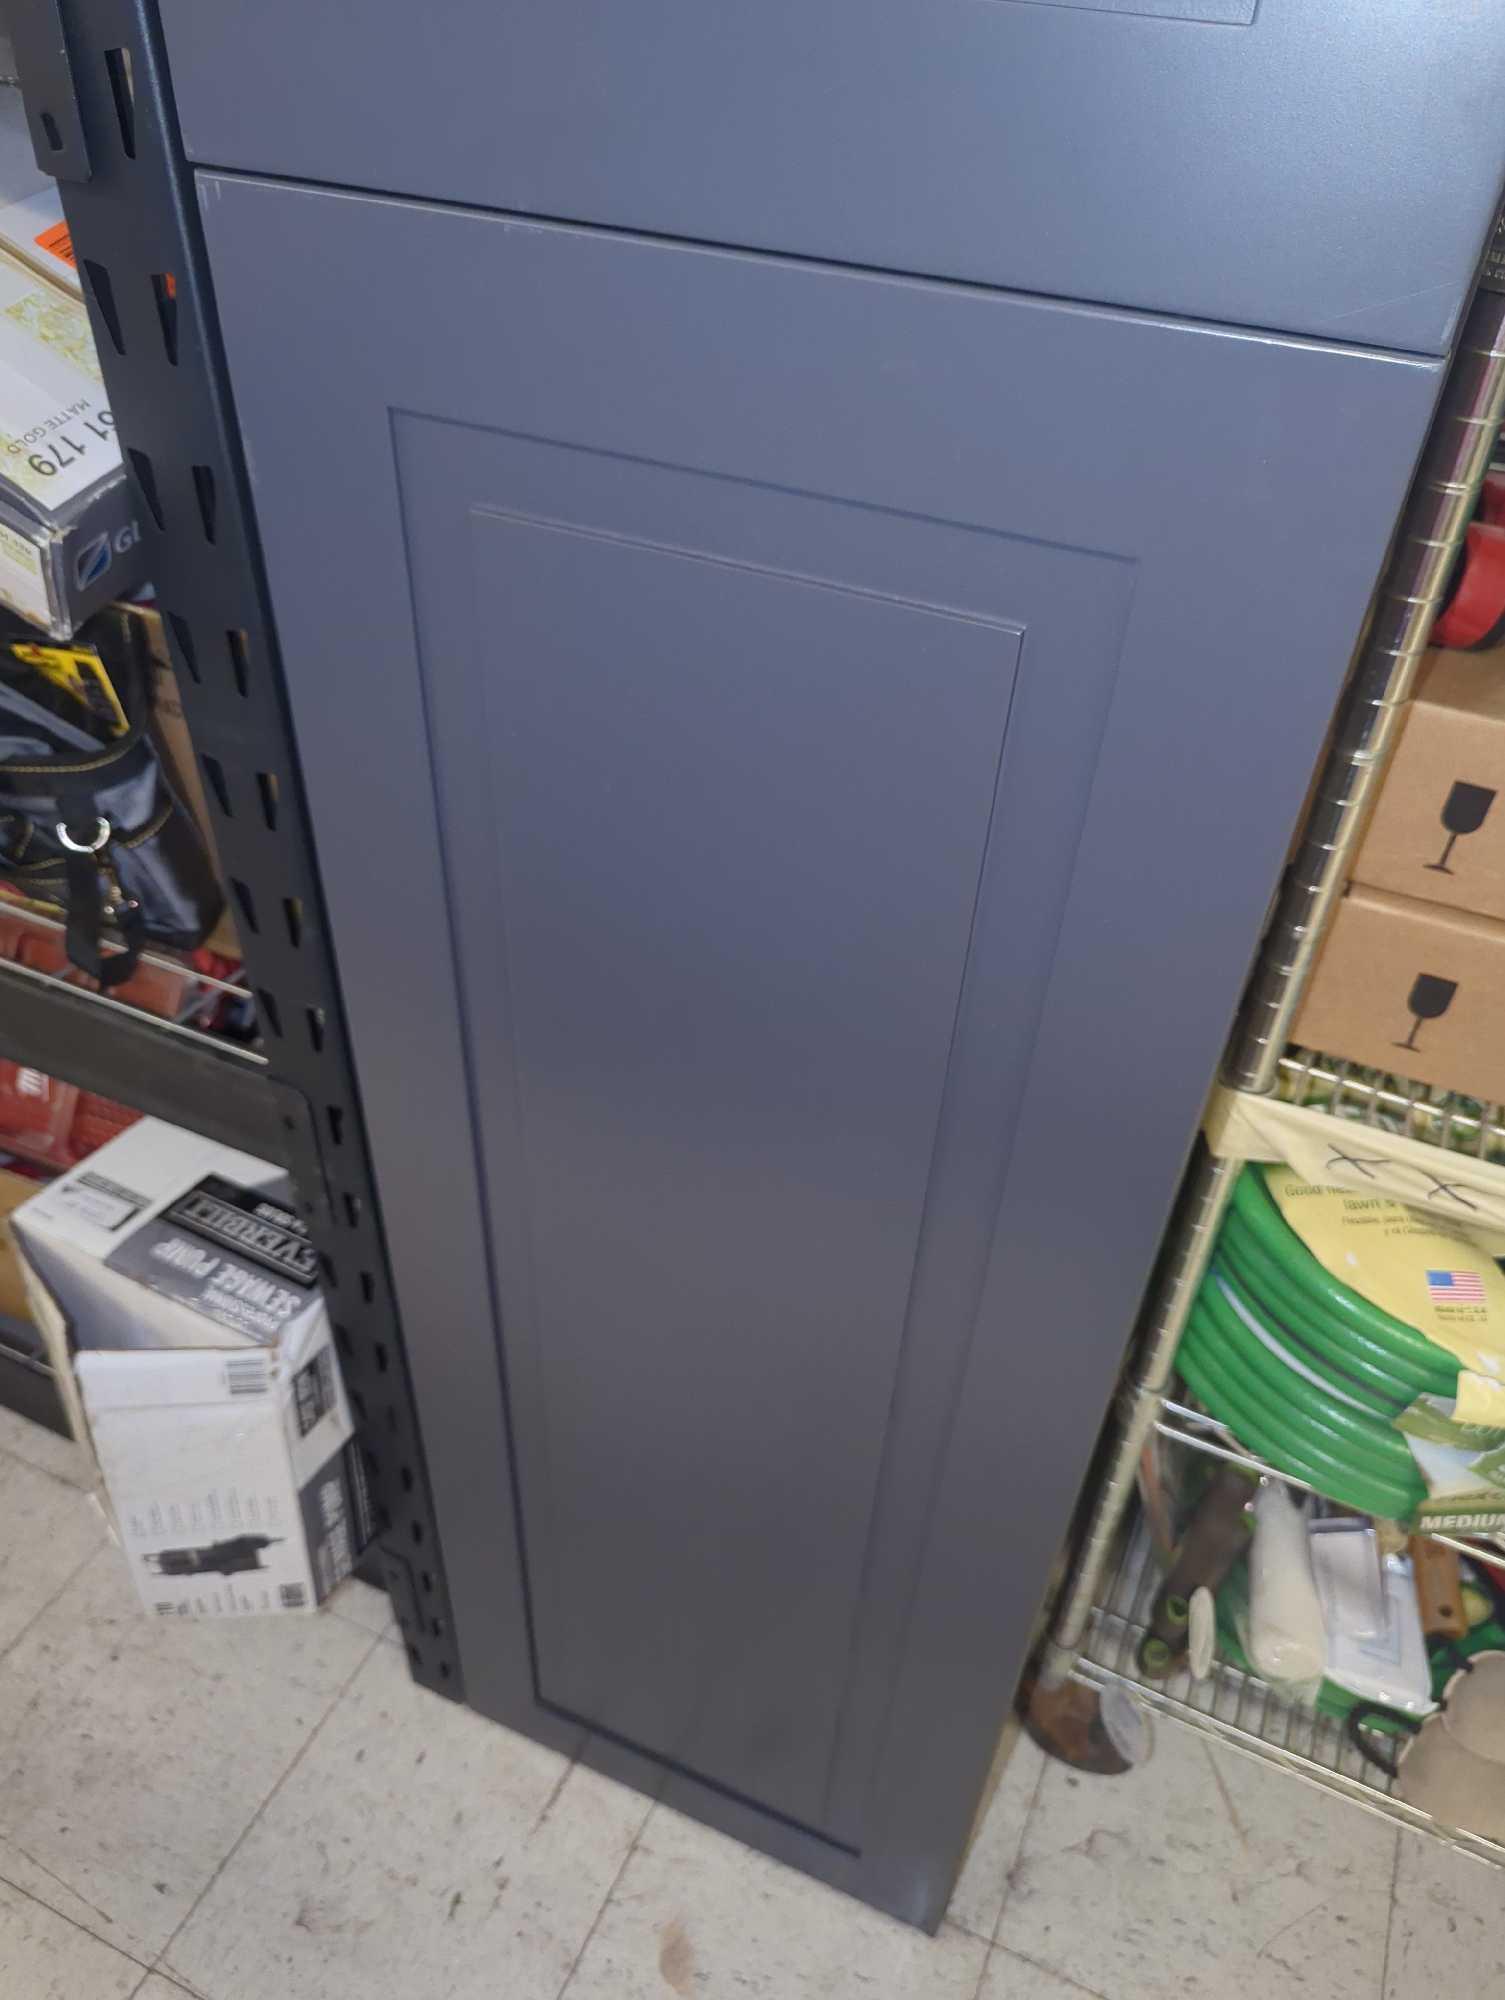 Hampton Bay (Back Needs Repaired) Freestanding Pantry Cabinet in Blue, Retail Price $349, Dimensions